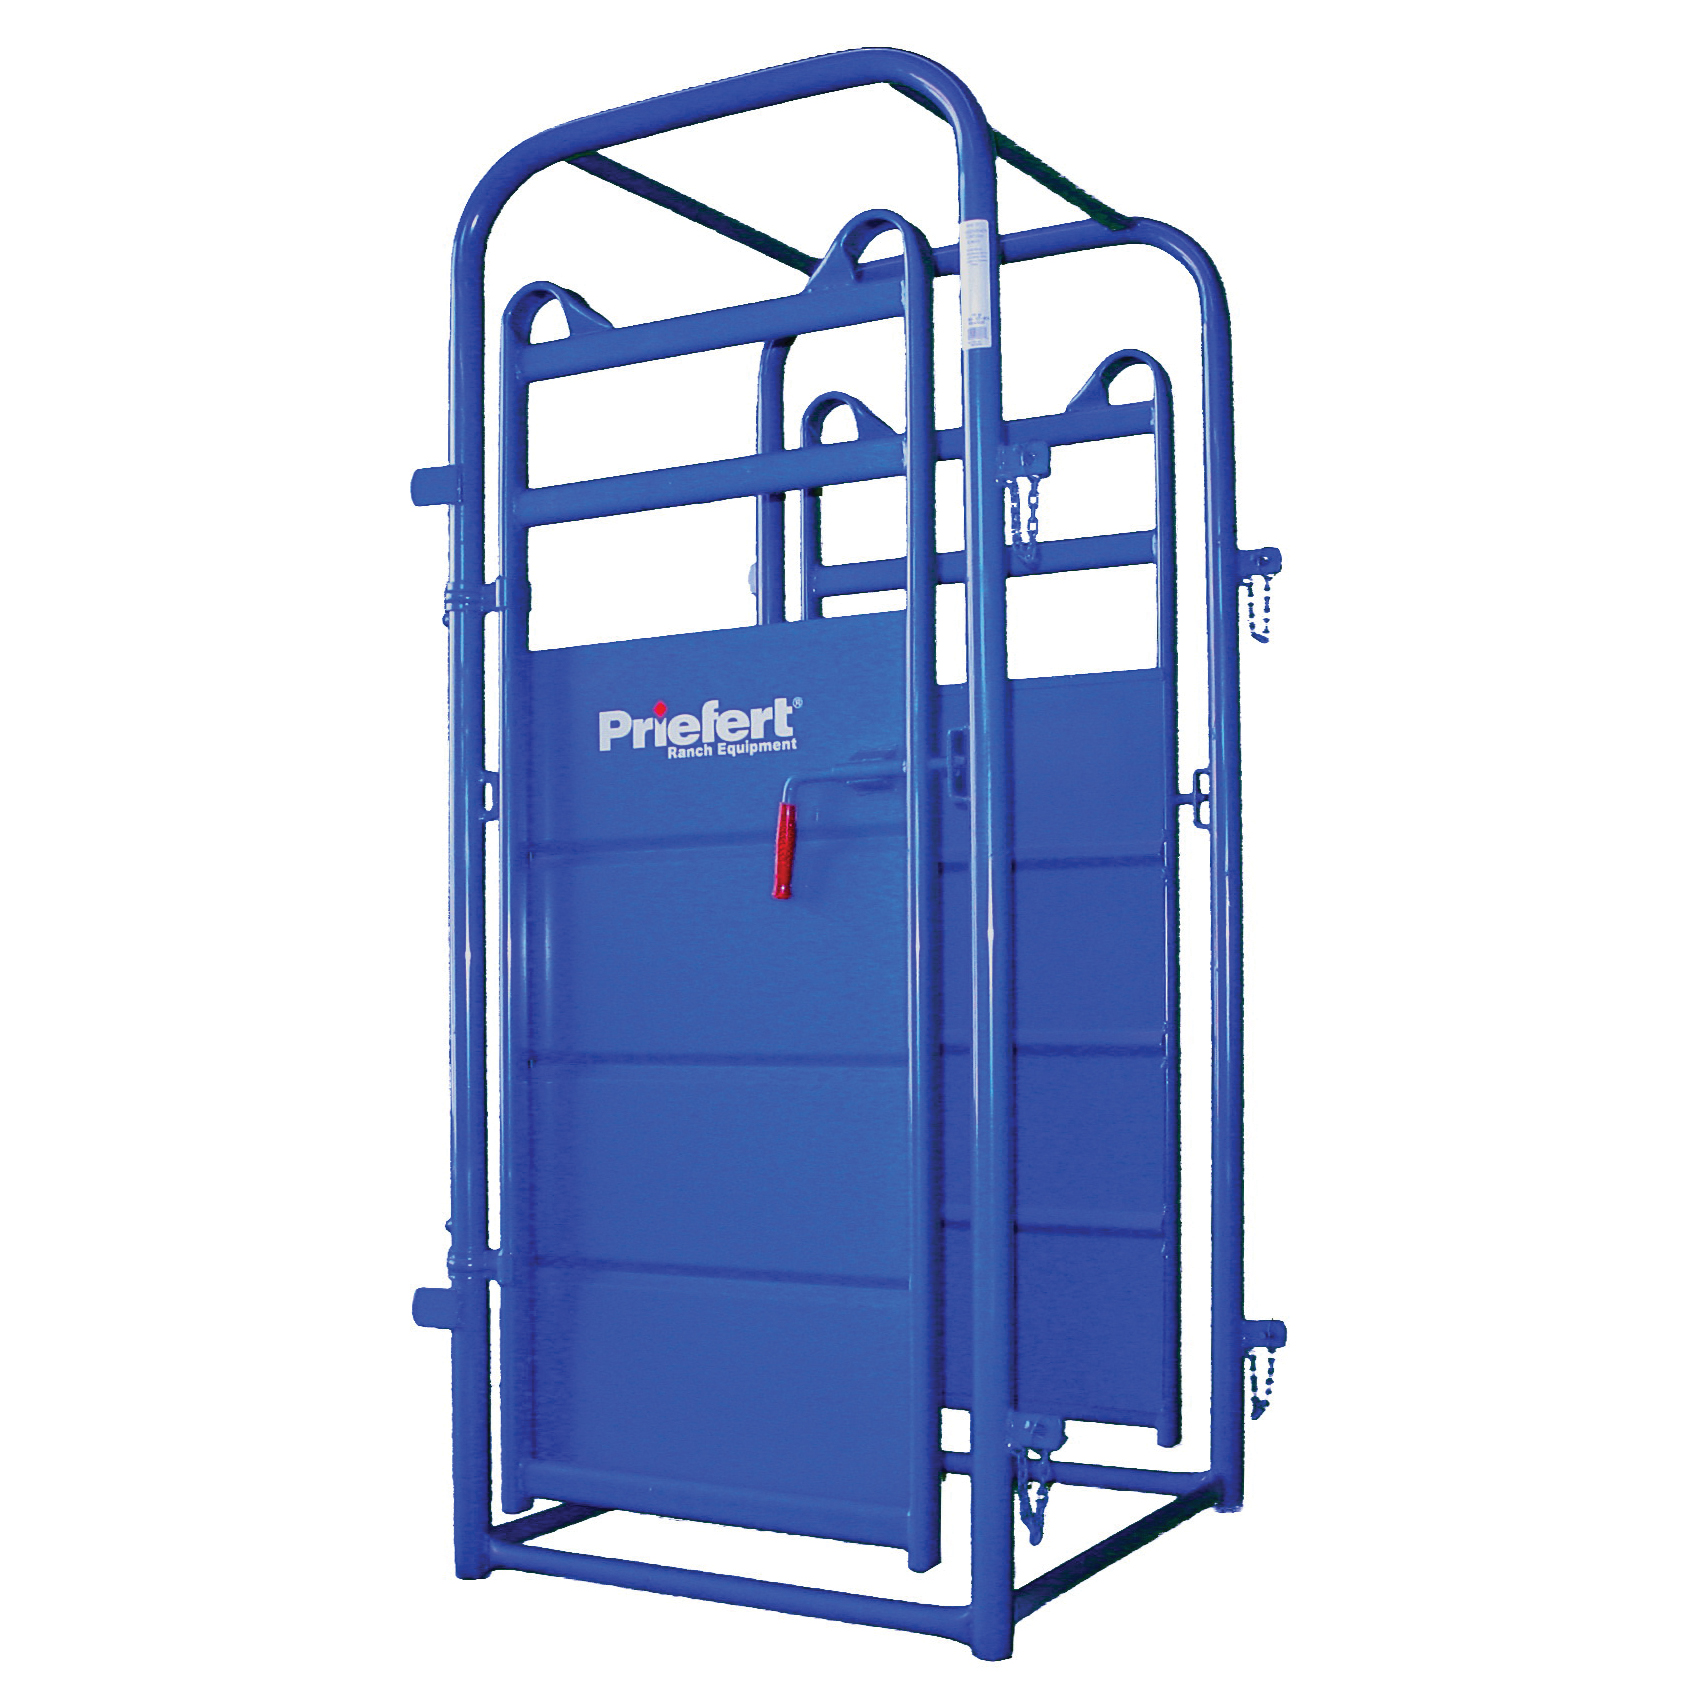 PC Palpation Cage, Priefert Blue, Powder-Coated, For: Priefert S01, S0191, S04 Squeeze Chutes